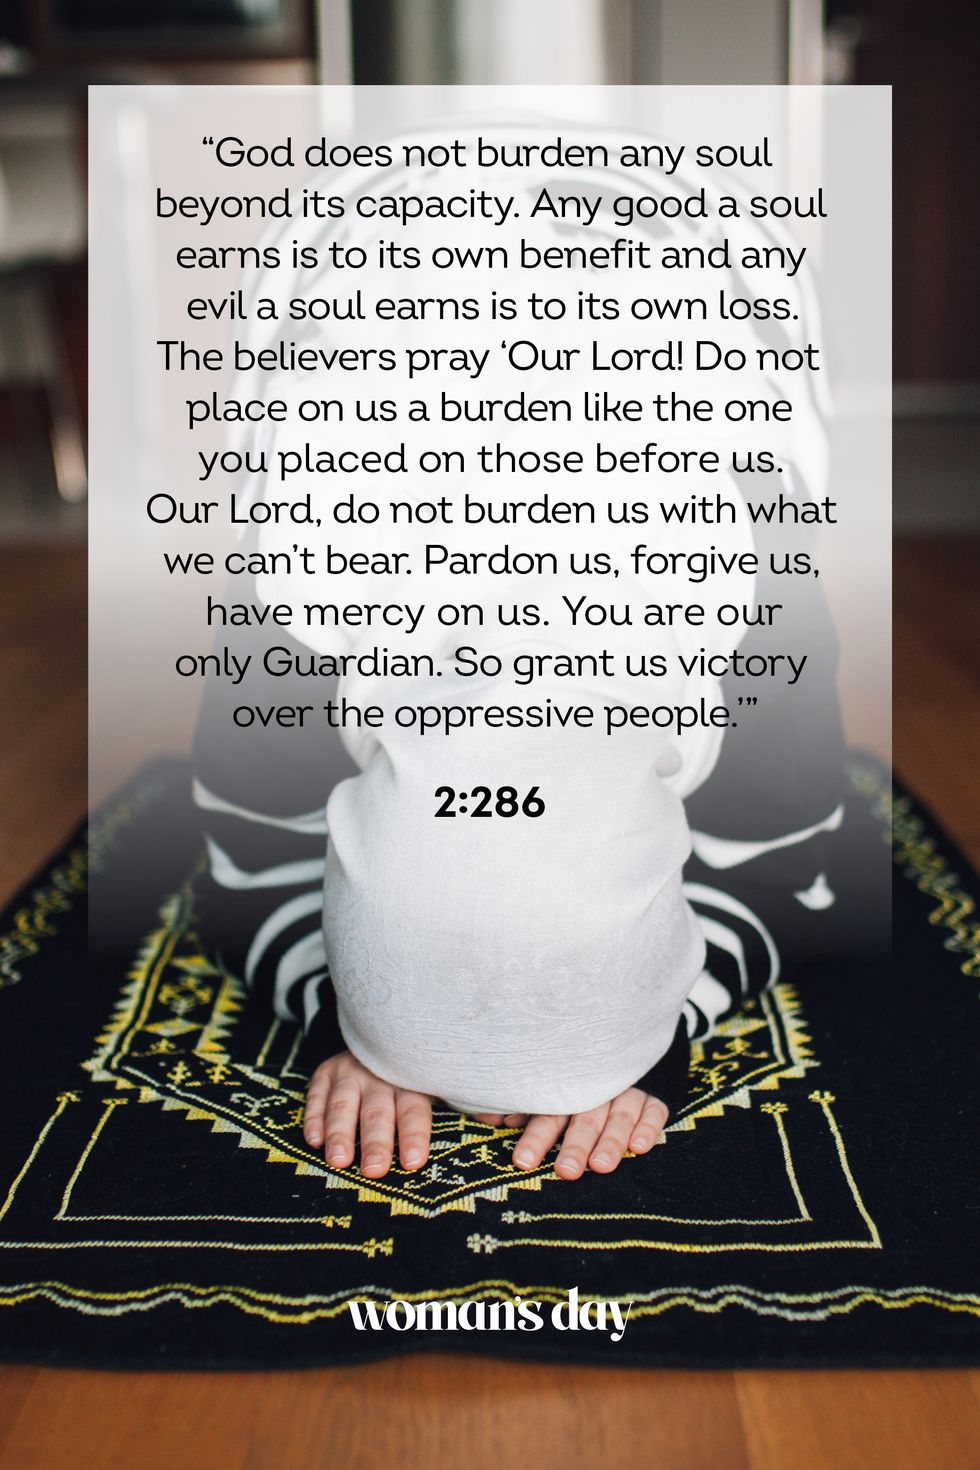  :(  Islamic quotes, Good people, Angel of death